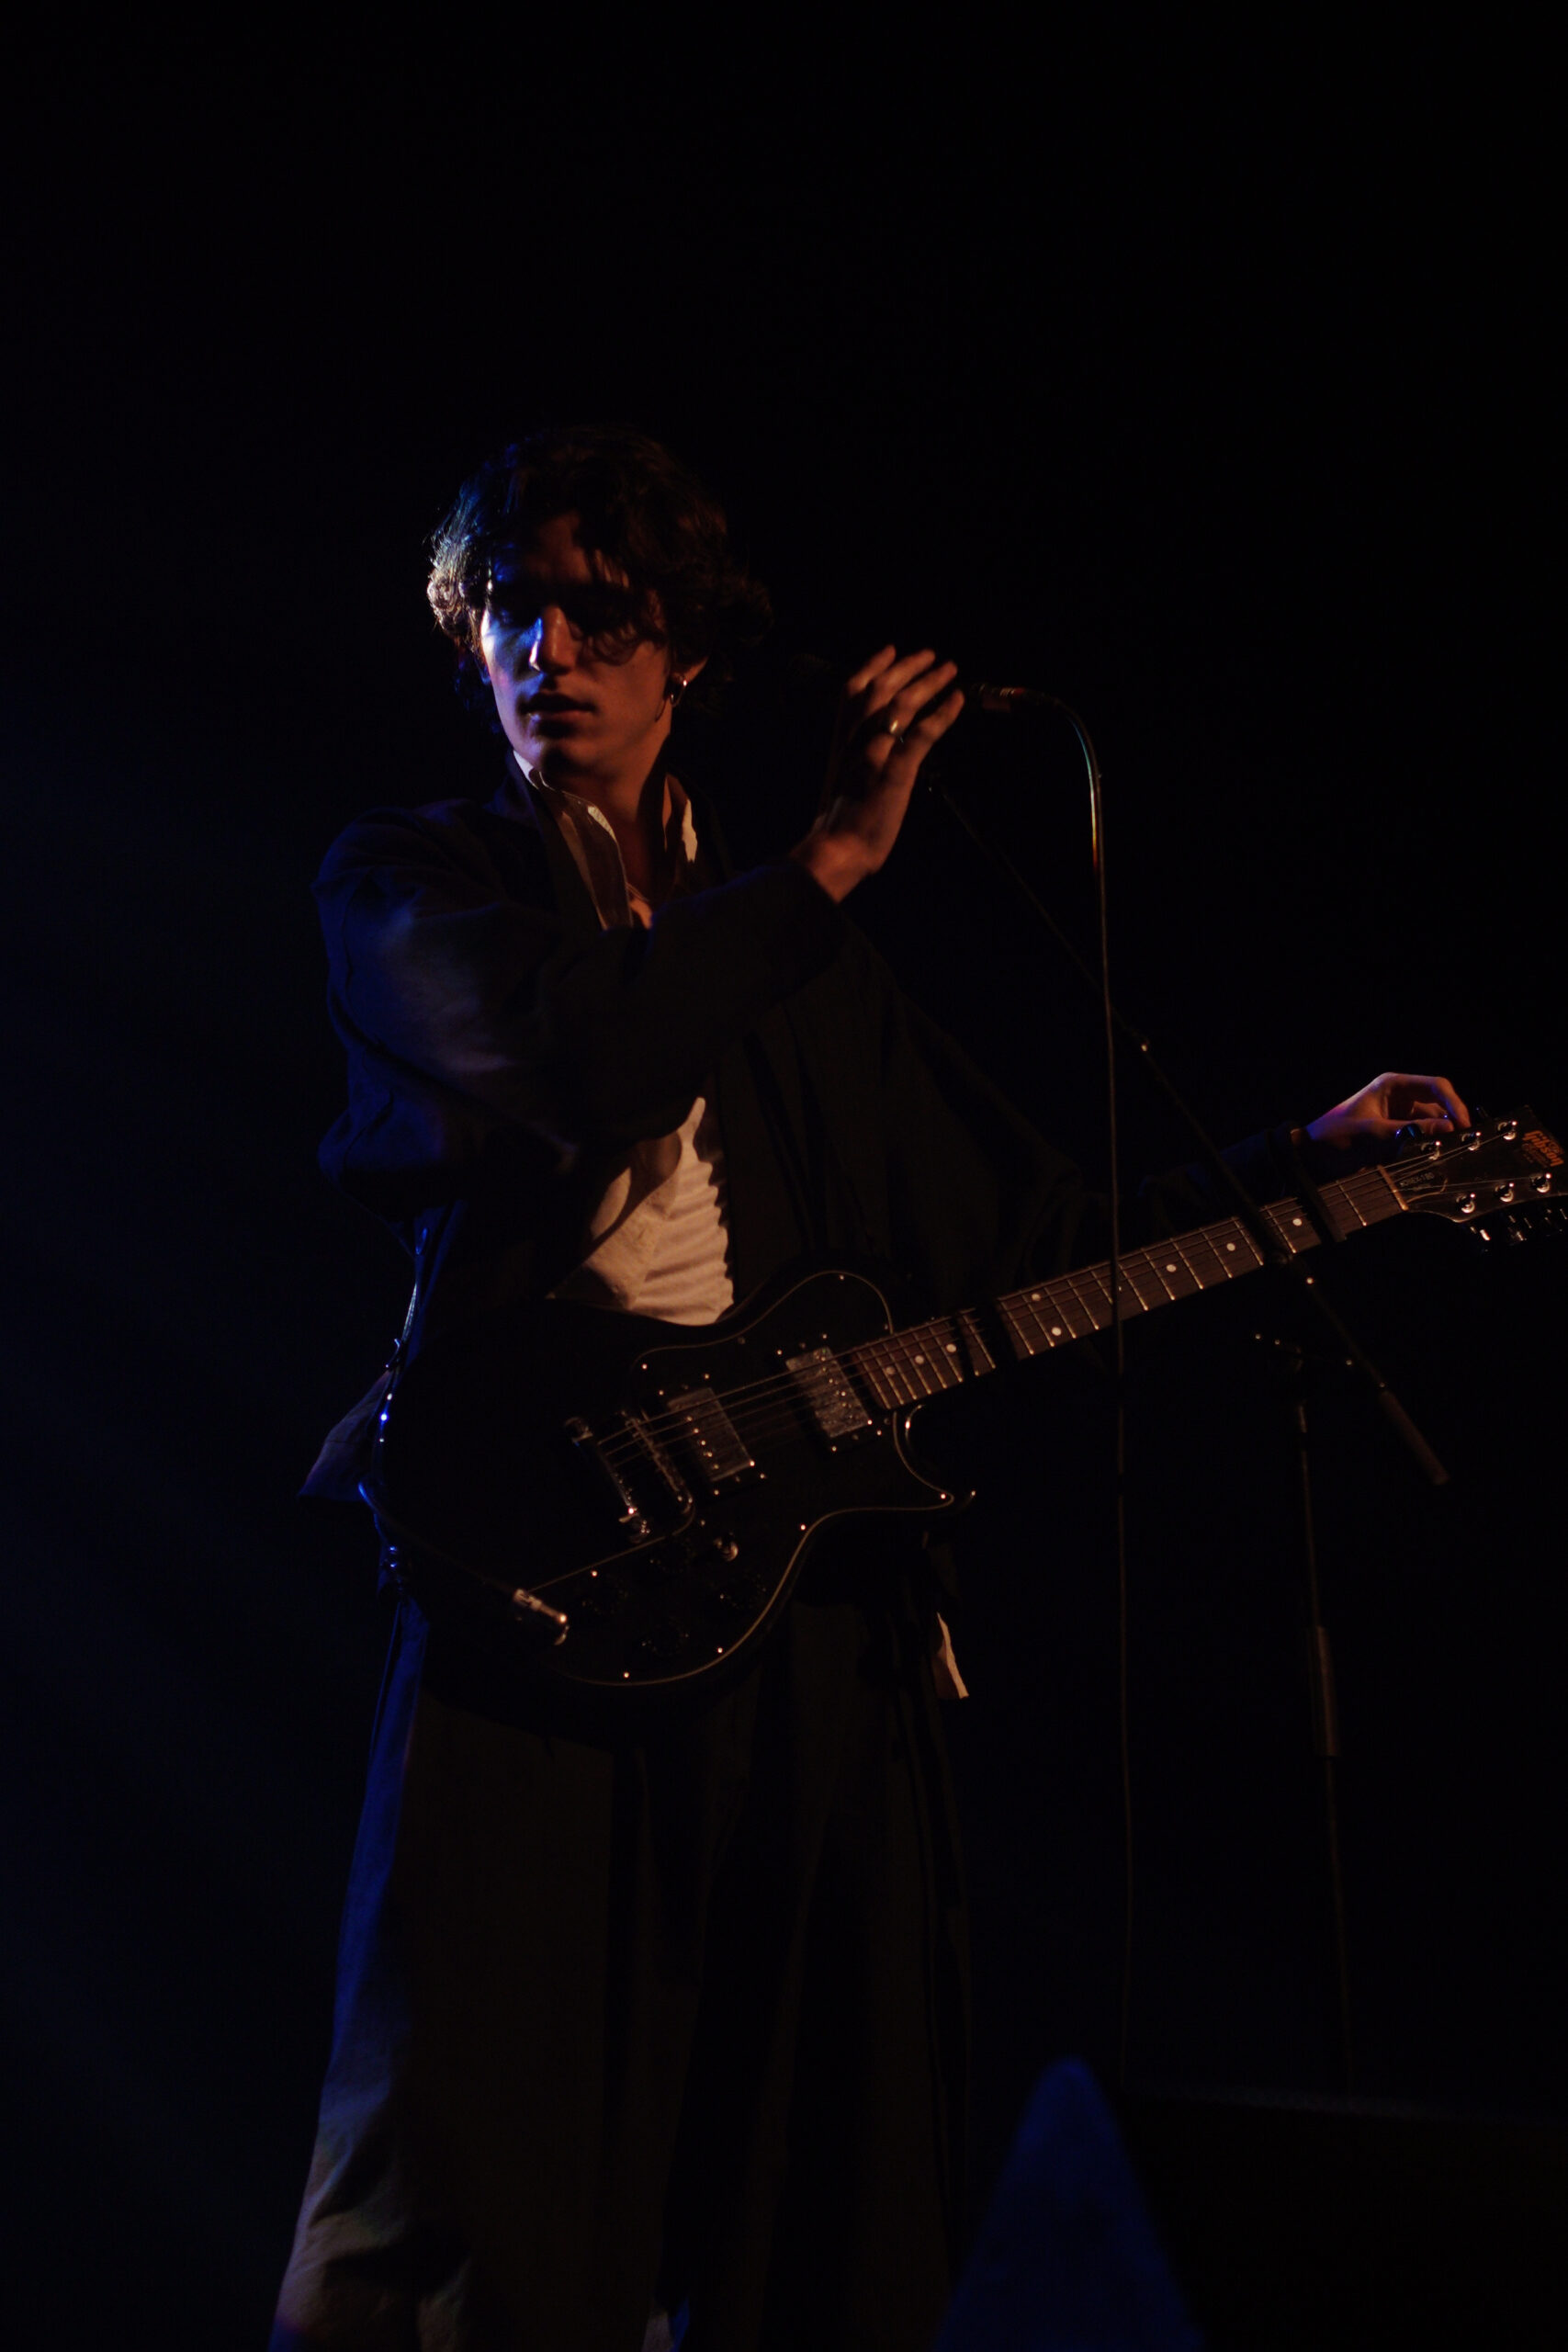 Tamino on stage playing the guitar